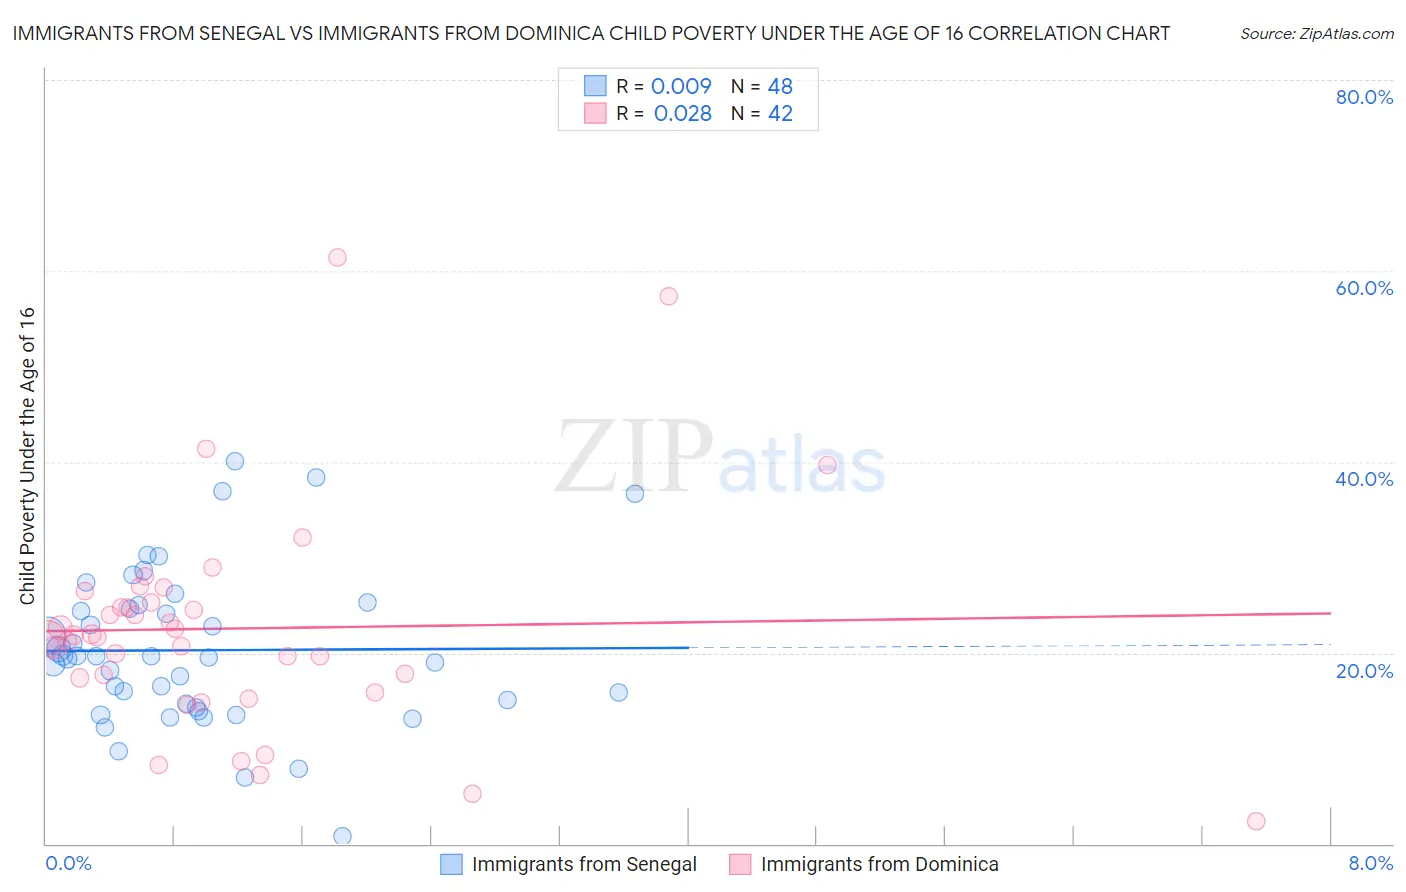 Immigrants from Senegal vs Immigrants from Dominica Child Poverty Under the Age of 16